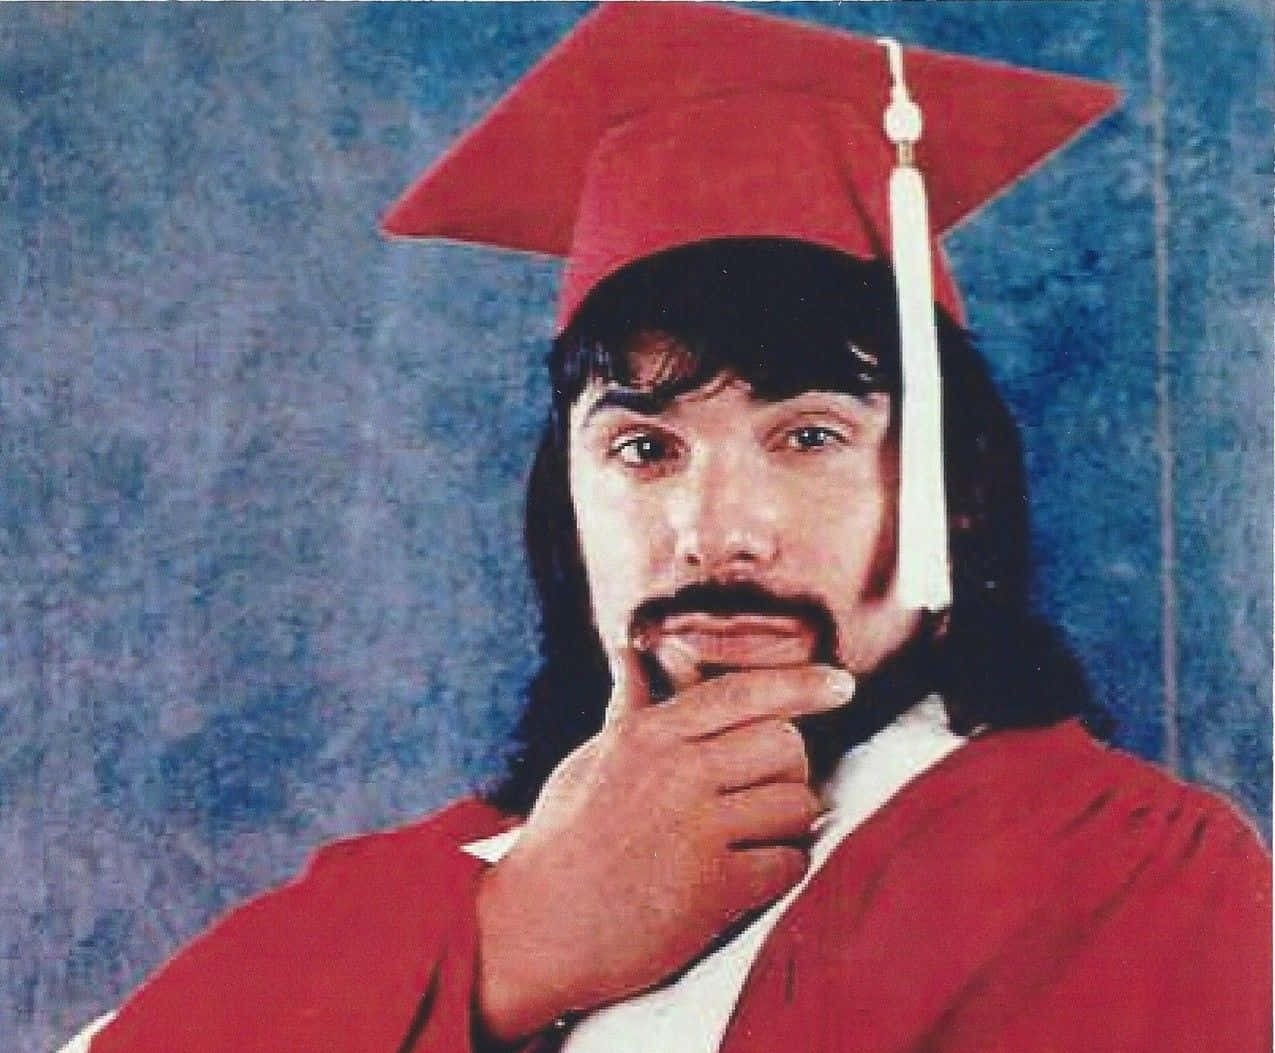 Lanny Poffo in Red Graduation Gown Wallpaper